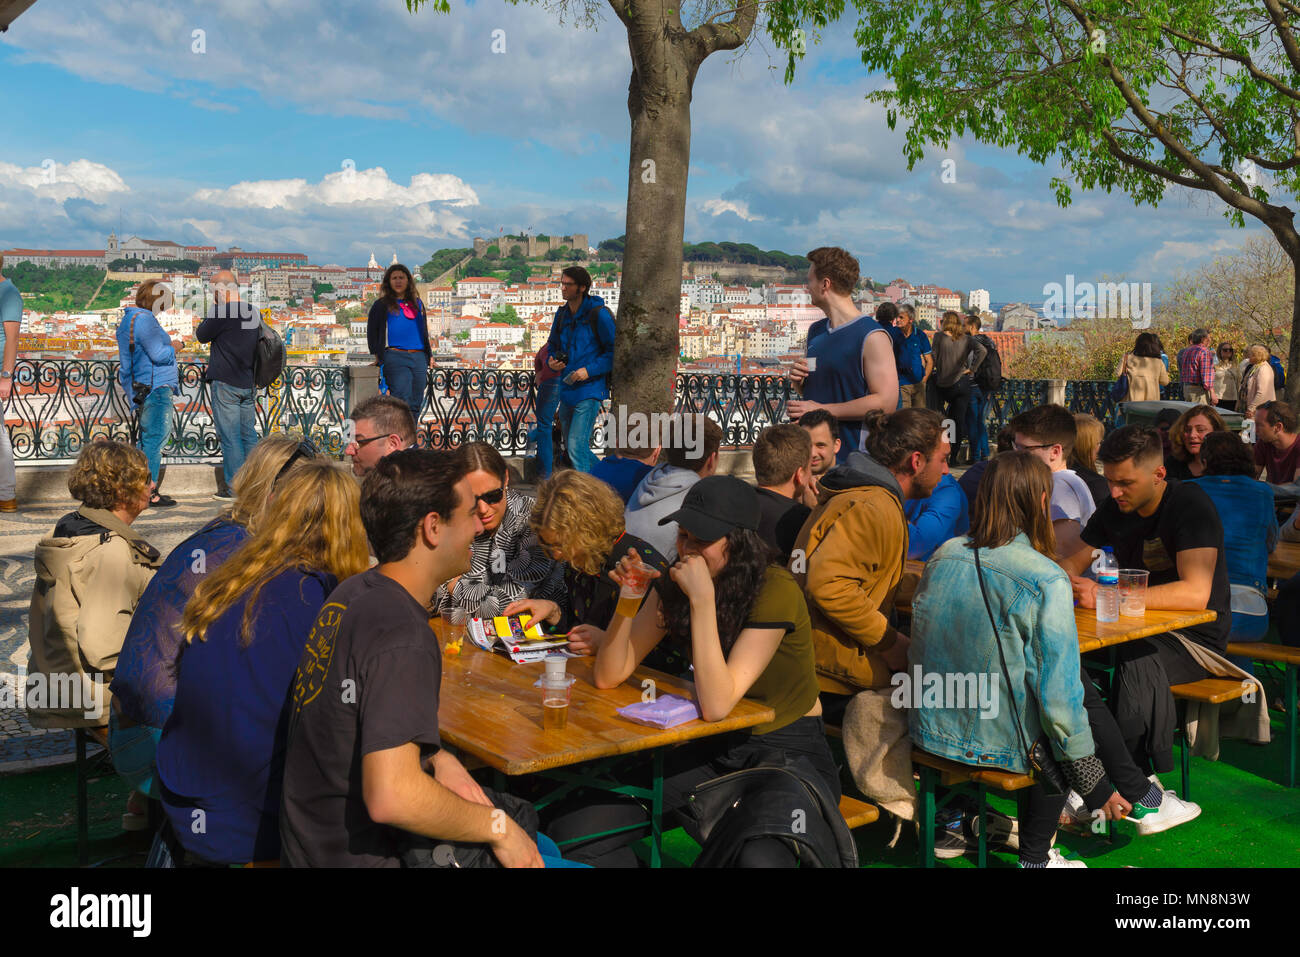 Lisbon young people, view of young people sitting on a terrace in the Miradouro de Sao Pedro de Alcantara with a view of Lisbon castle in the distance. Stock Photo